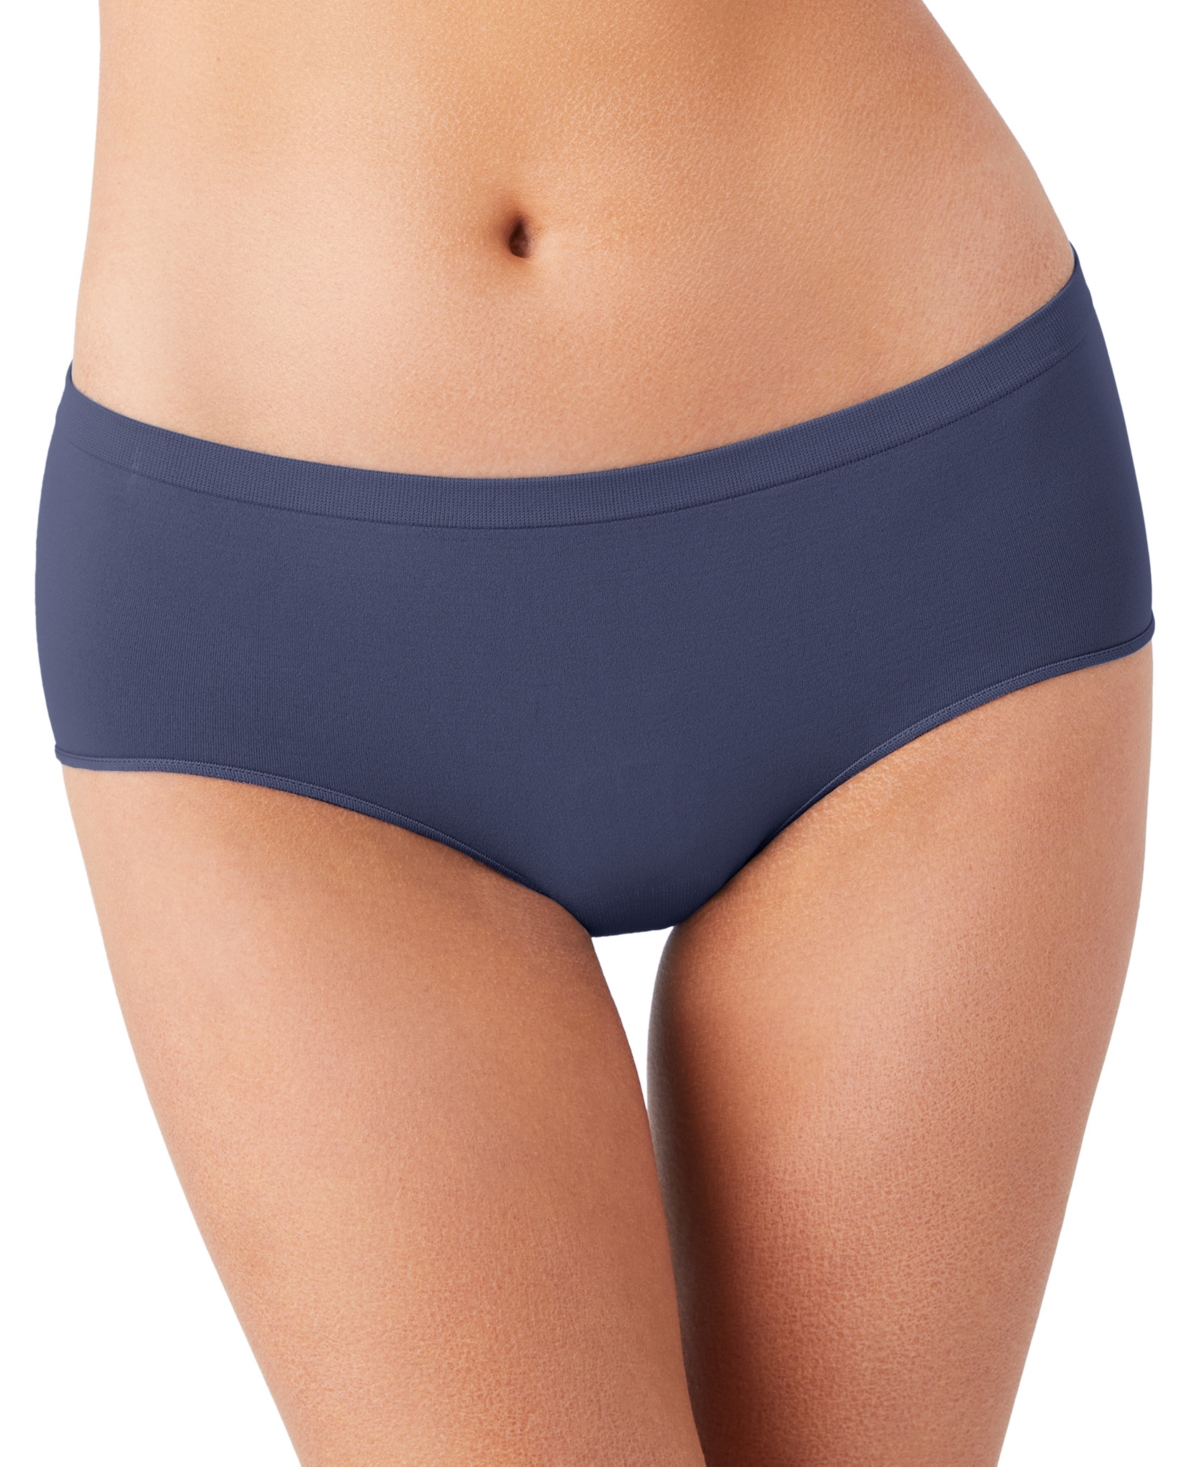 by Wacoal Women's Comfort Intended Hipster Underwear 970240 - Au Natural (Nude )